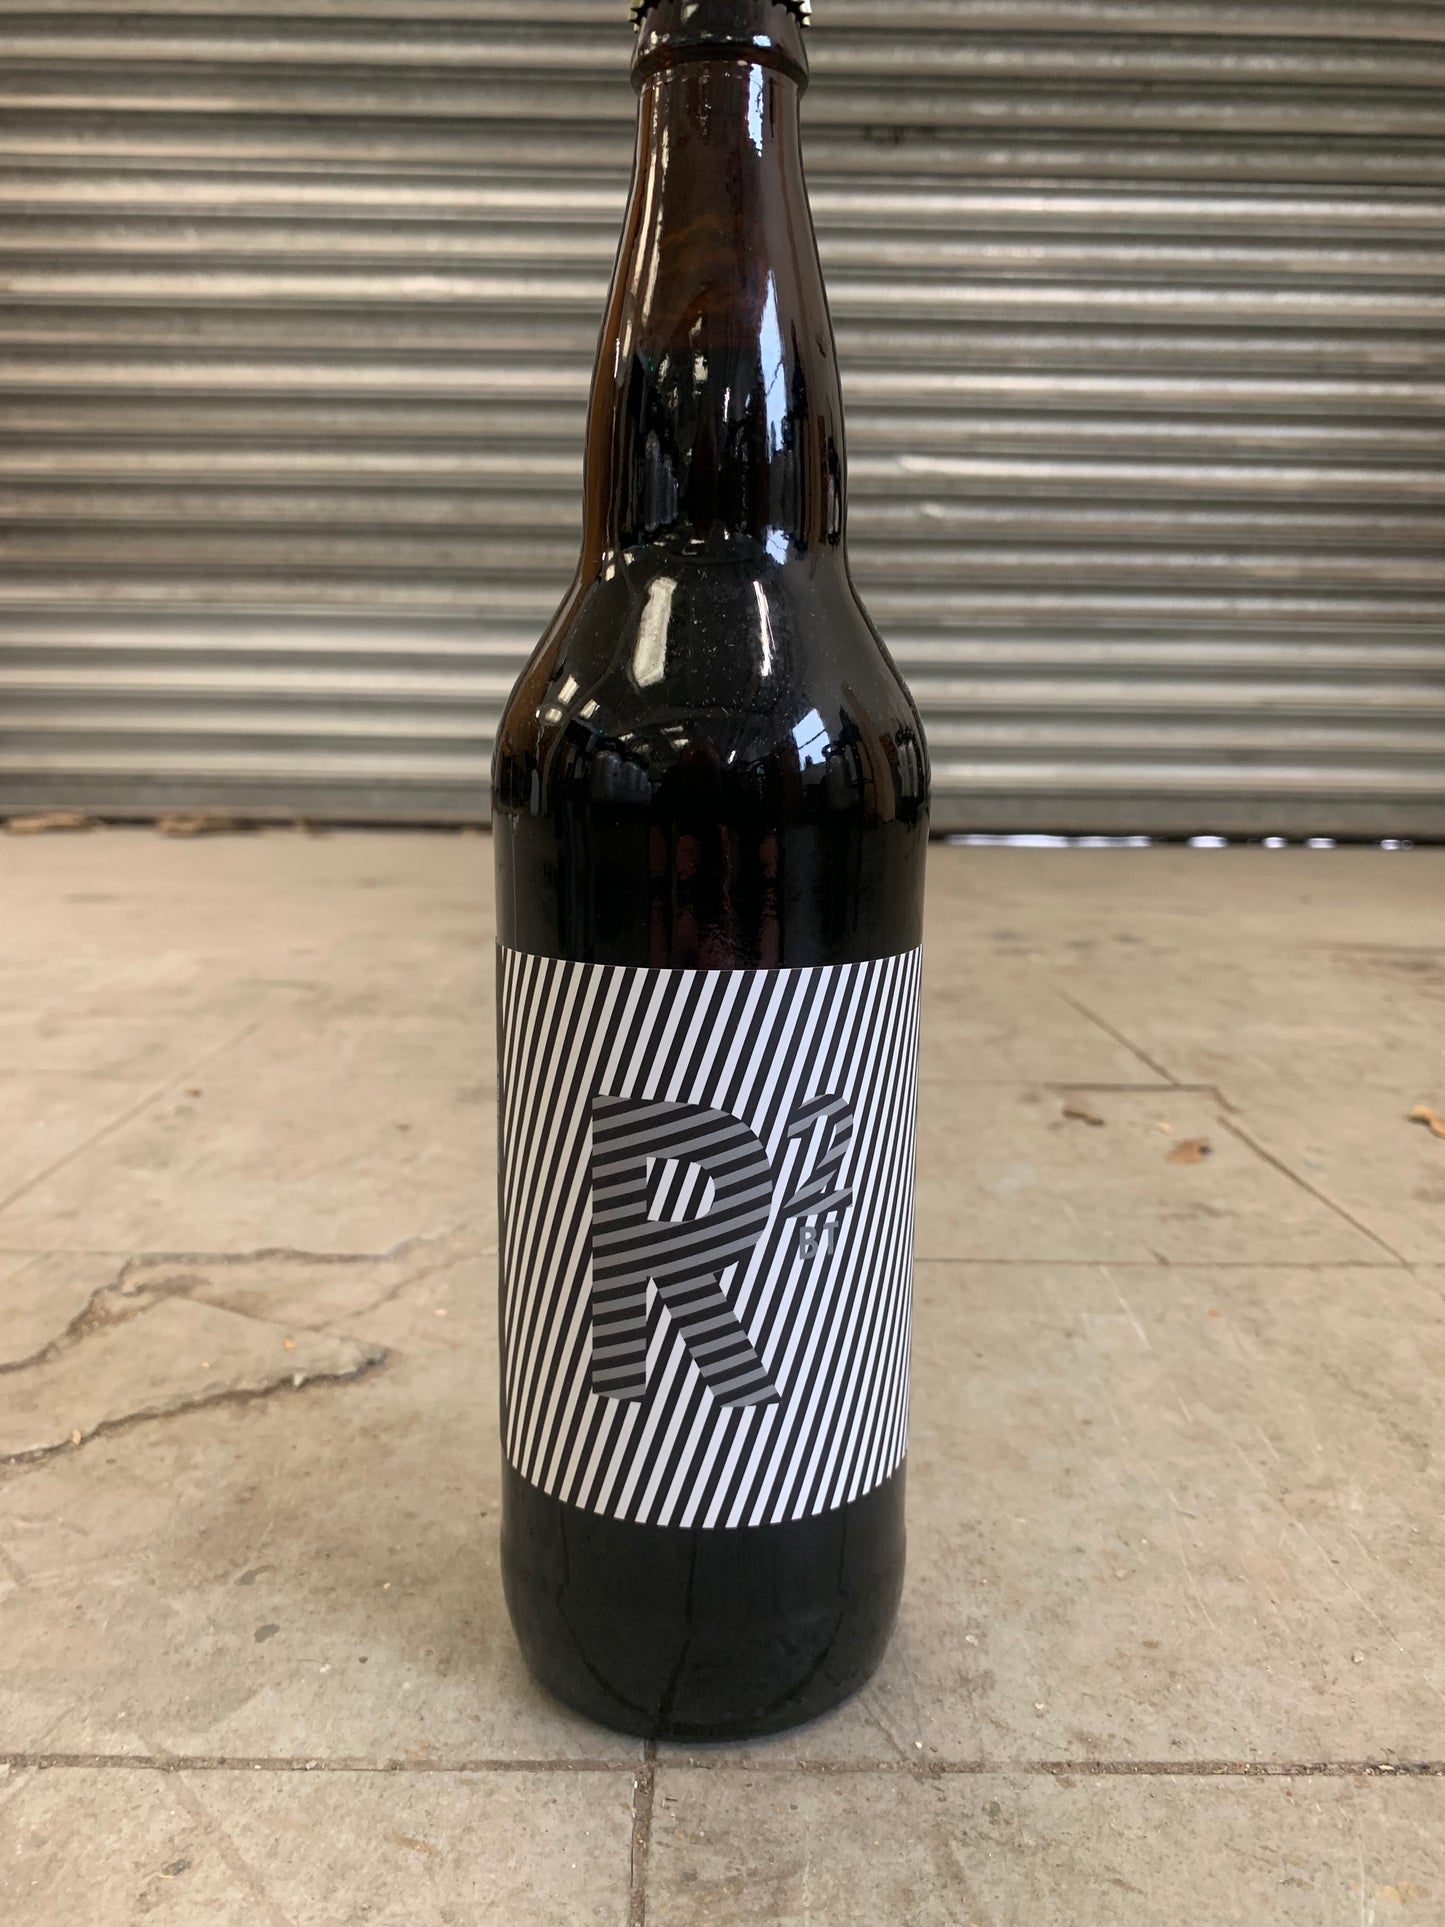 Cycle R2 BT - Whiskey Barrel Aged Imperial Stout